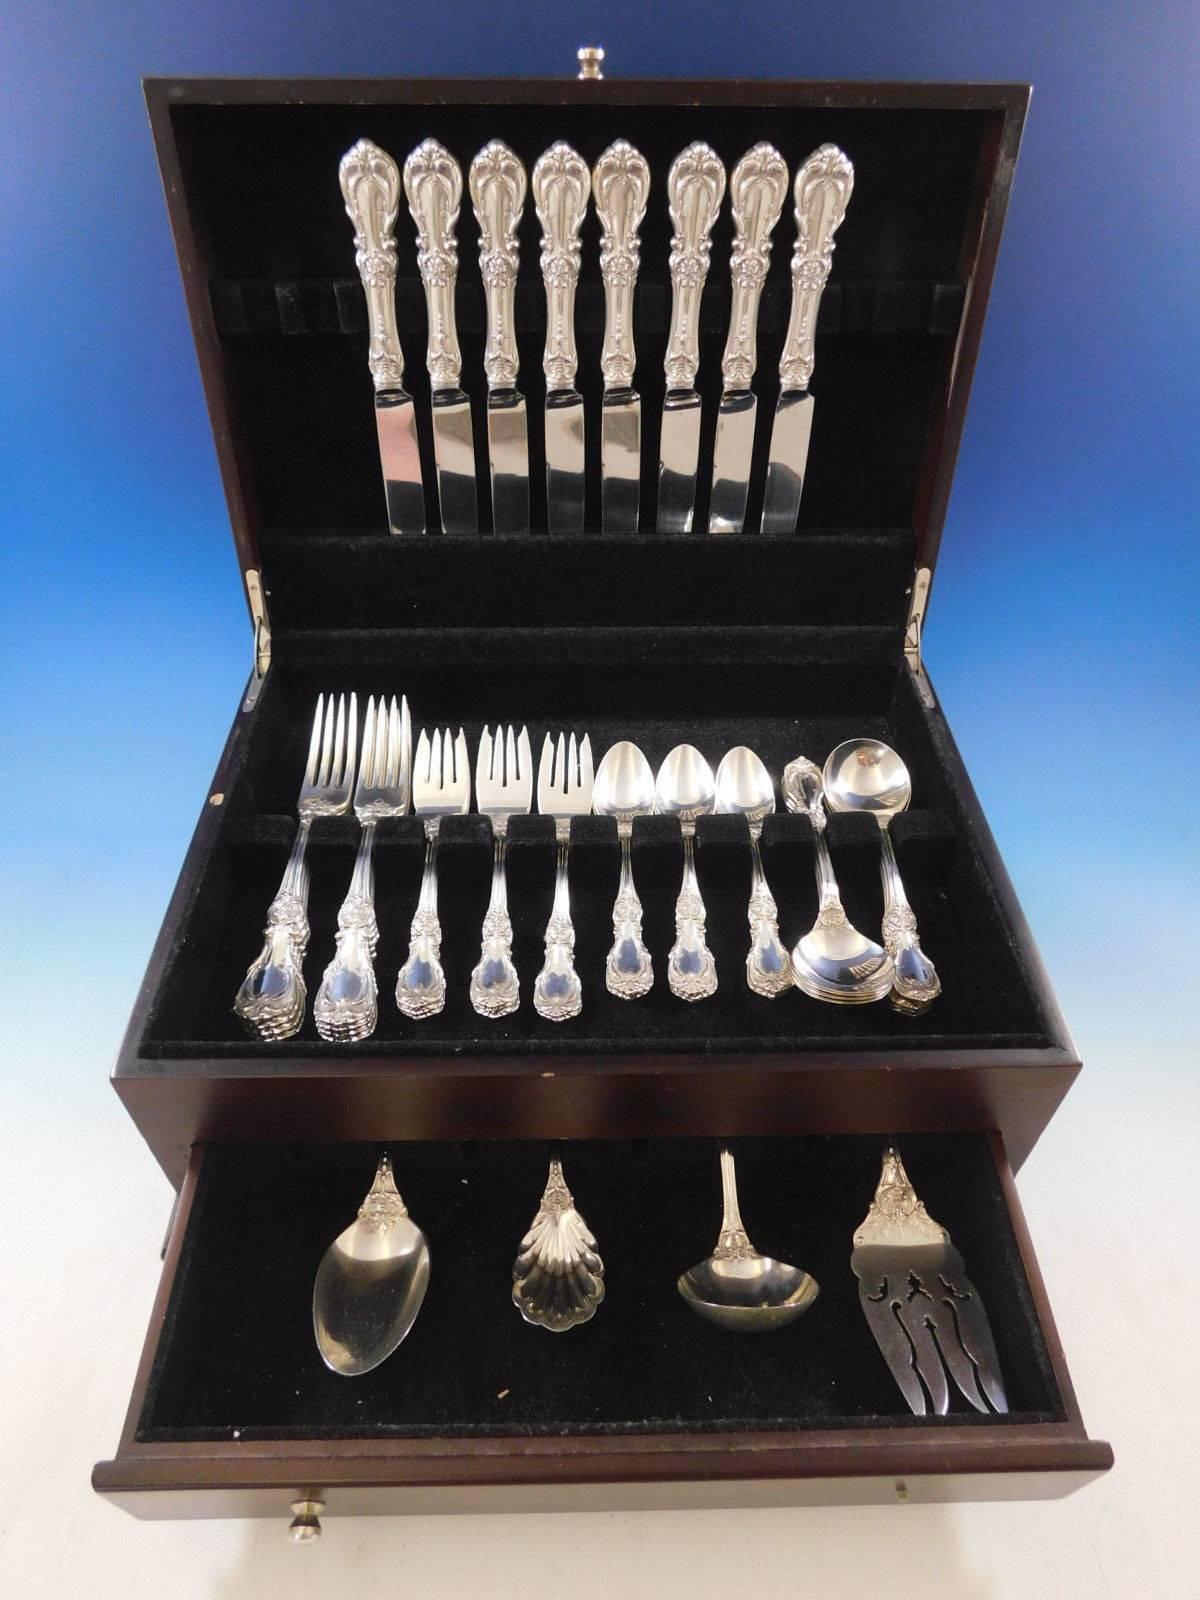 Gorgeous Dinner Size Burgundy by Reed & Barton sterling silver Flatware set, 44 pieces. This set includes:

8 Dinner Size Knives, 9 5/8